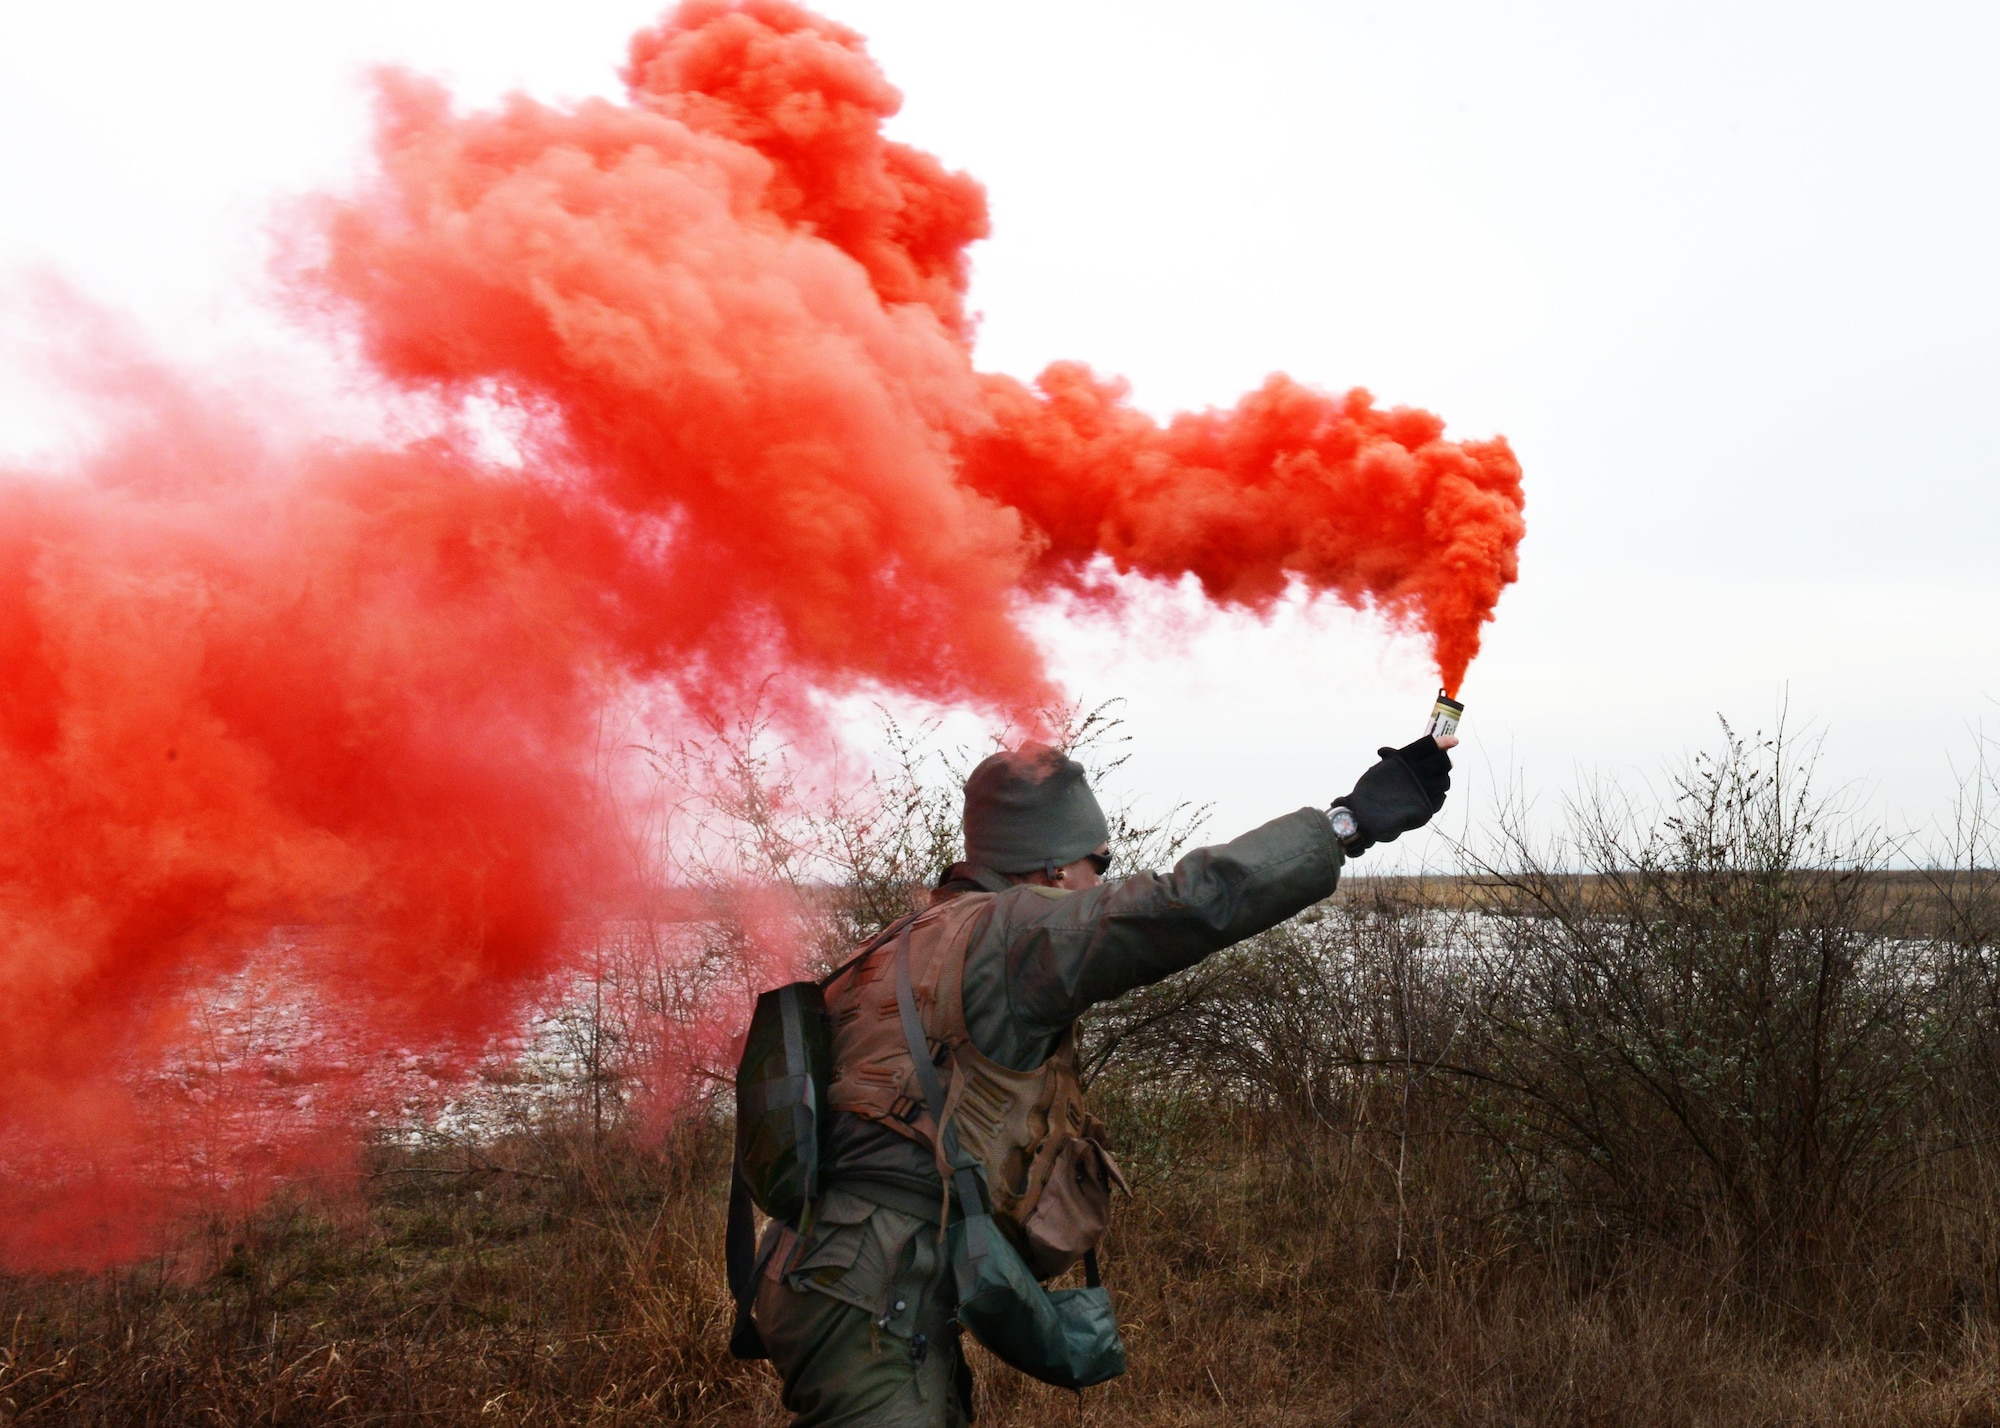 Lt. Col. Christopher Austin, 510th Fighter Squadron commander, utilizes red distress smoke to signal his location to a U.S. Army 12th Combat Aviation Brigade UH-60 Black Hawk helicopter during a simulated combat search and rescue, Jan. 28, 2014, at Cellina Meduna training grounds near Maniago, Italy.  (U.S. Air Force/Airman 1st Ryan Conroy) 
